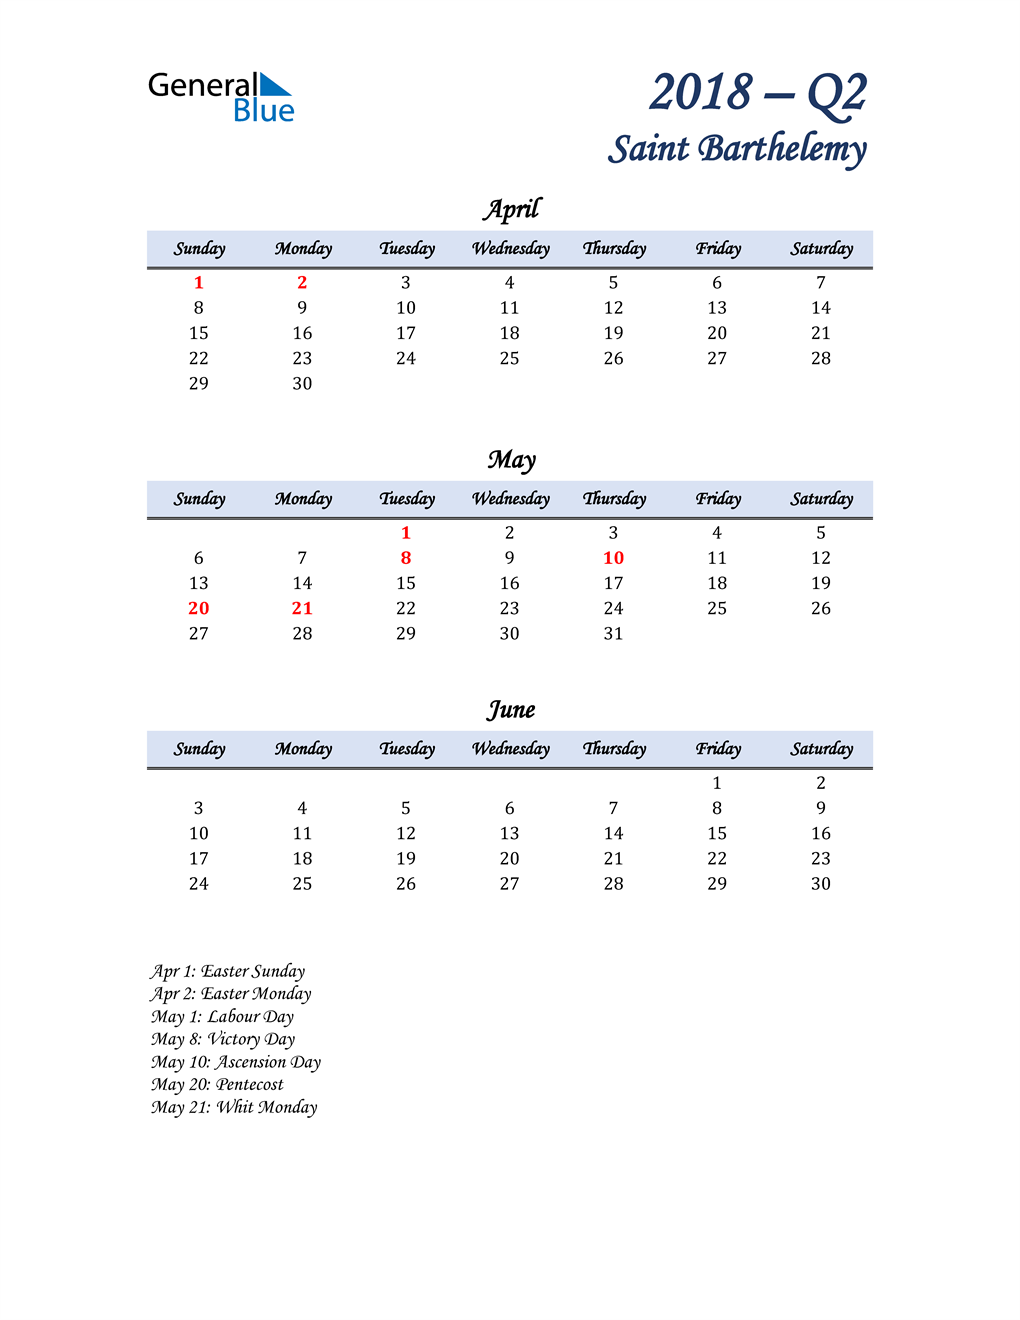  April, May, and June Calendar for Saint Barthelemy